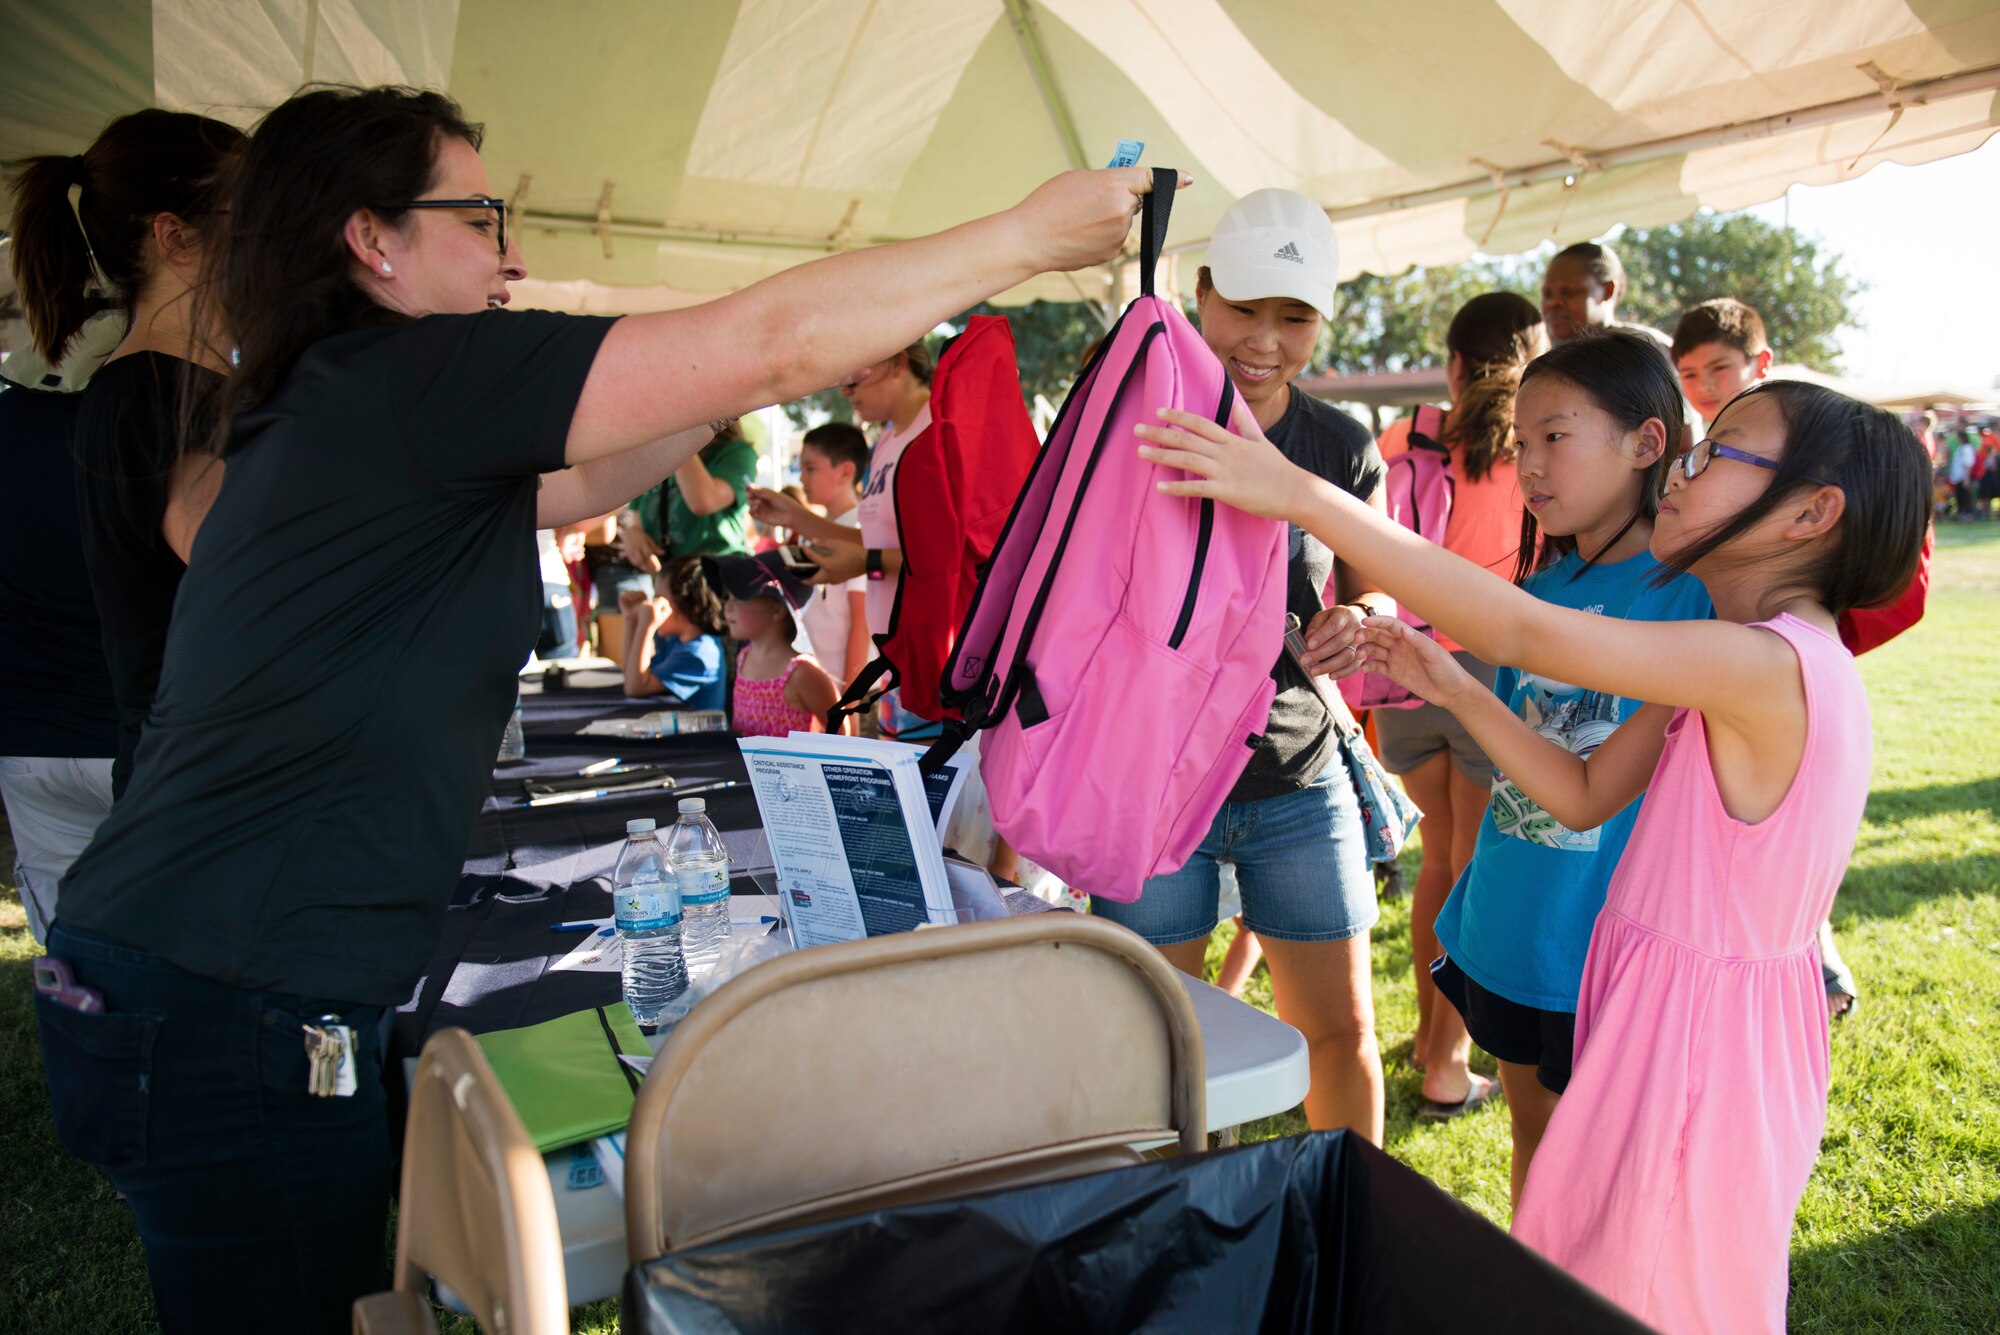 A volunteer hands a backpack to a girl at the Back-To-School Bash July 25, 2018, at Luke Air Force Base, Ariz. Freebies at the Bash included notebooks, folders, binders, markers, crayons, and many other items. (U.S. Air Force photo by Senior Airman Ridge Shan)